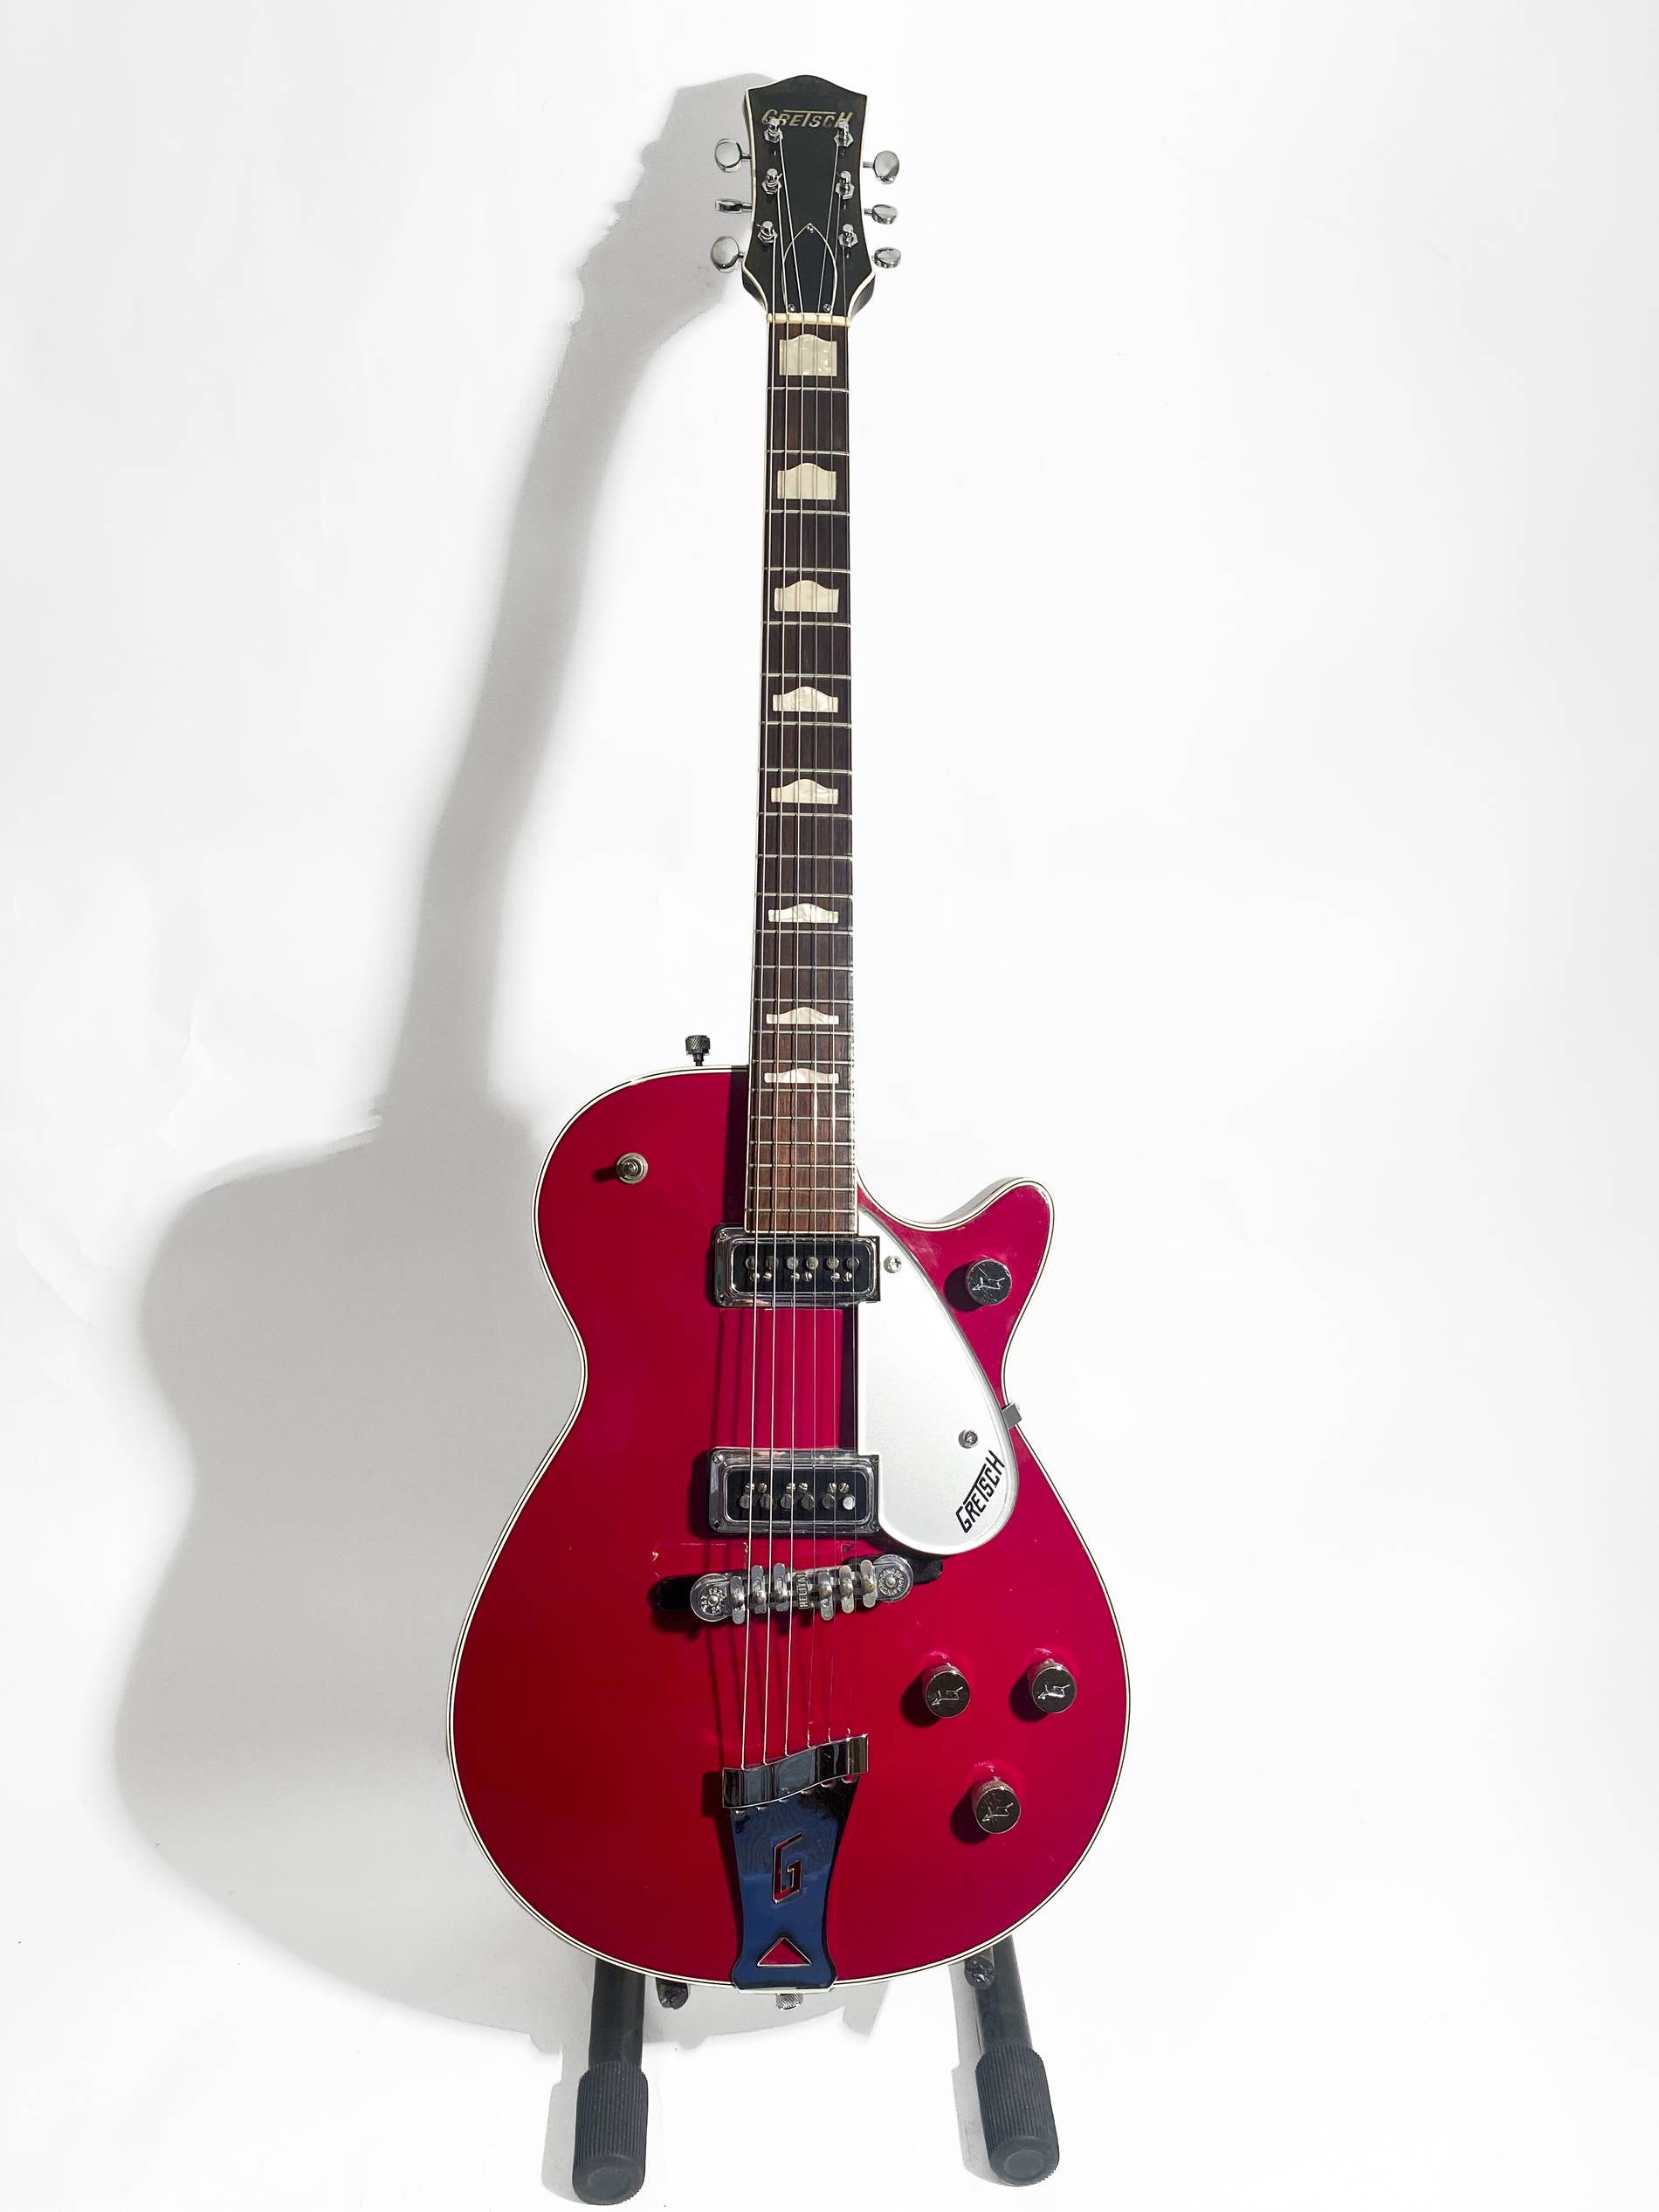 Bo Diddeley’s Gretsch Jet Firebird Guitar. It is strongly believed that this is the very instrument that appeared on four of Bo’s earliest and most beloved record album covers